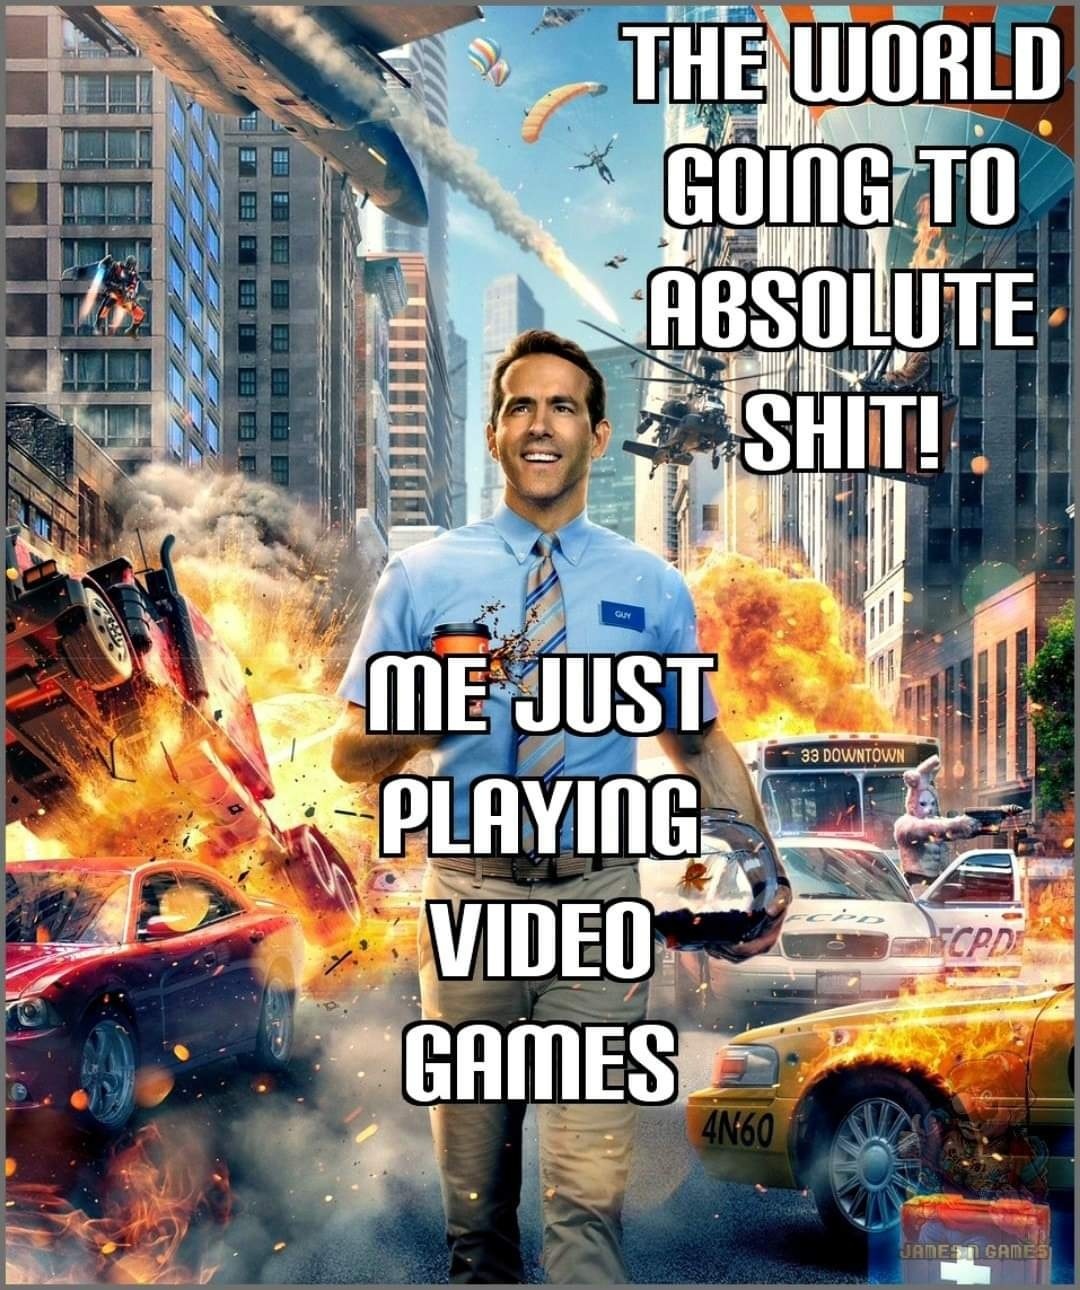 funny gaming memes - vox cinema movies - The World Going To Absolute Shit! will 33 Downtown Me Just Playing Video Games Cpd 4N60 James Games